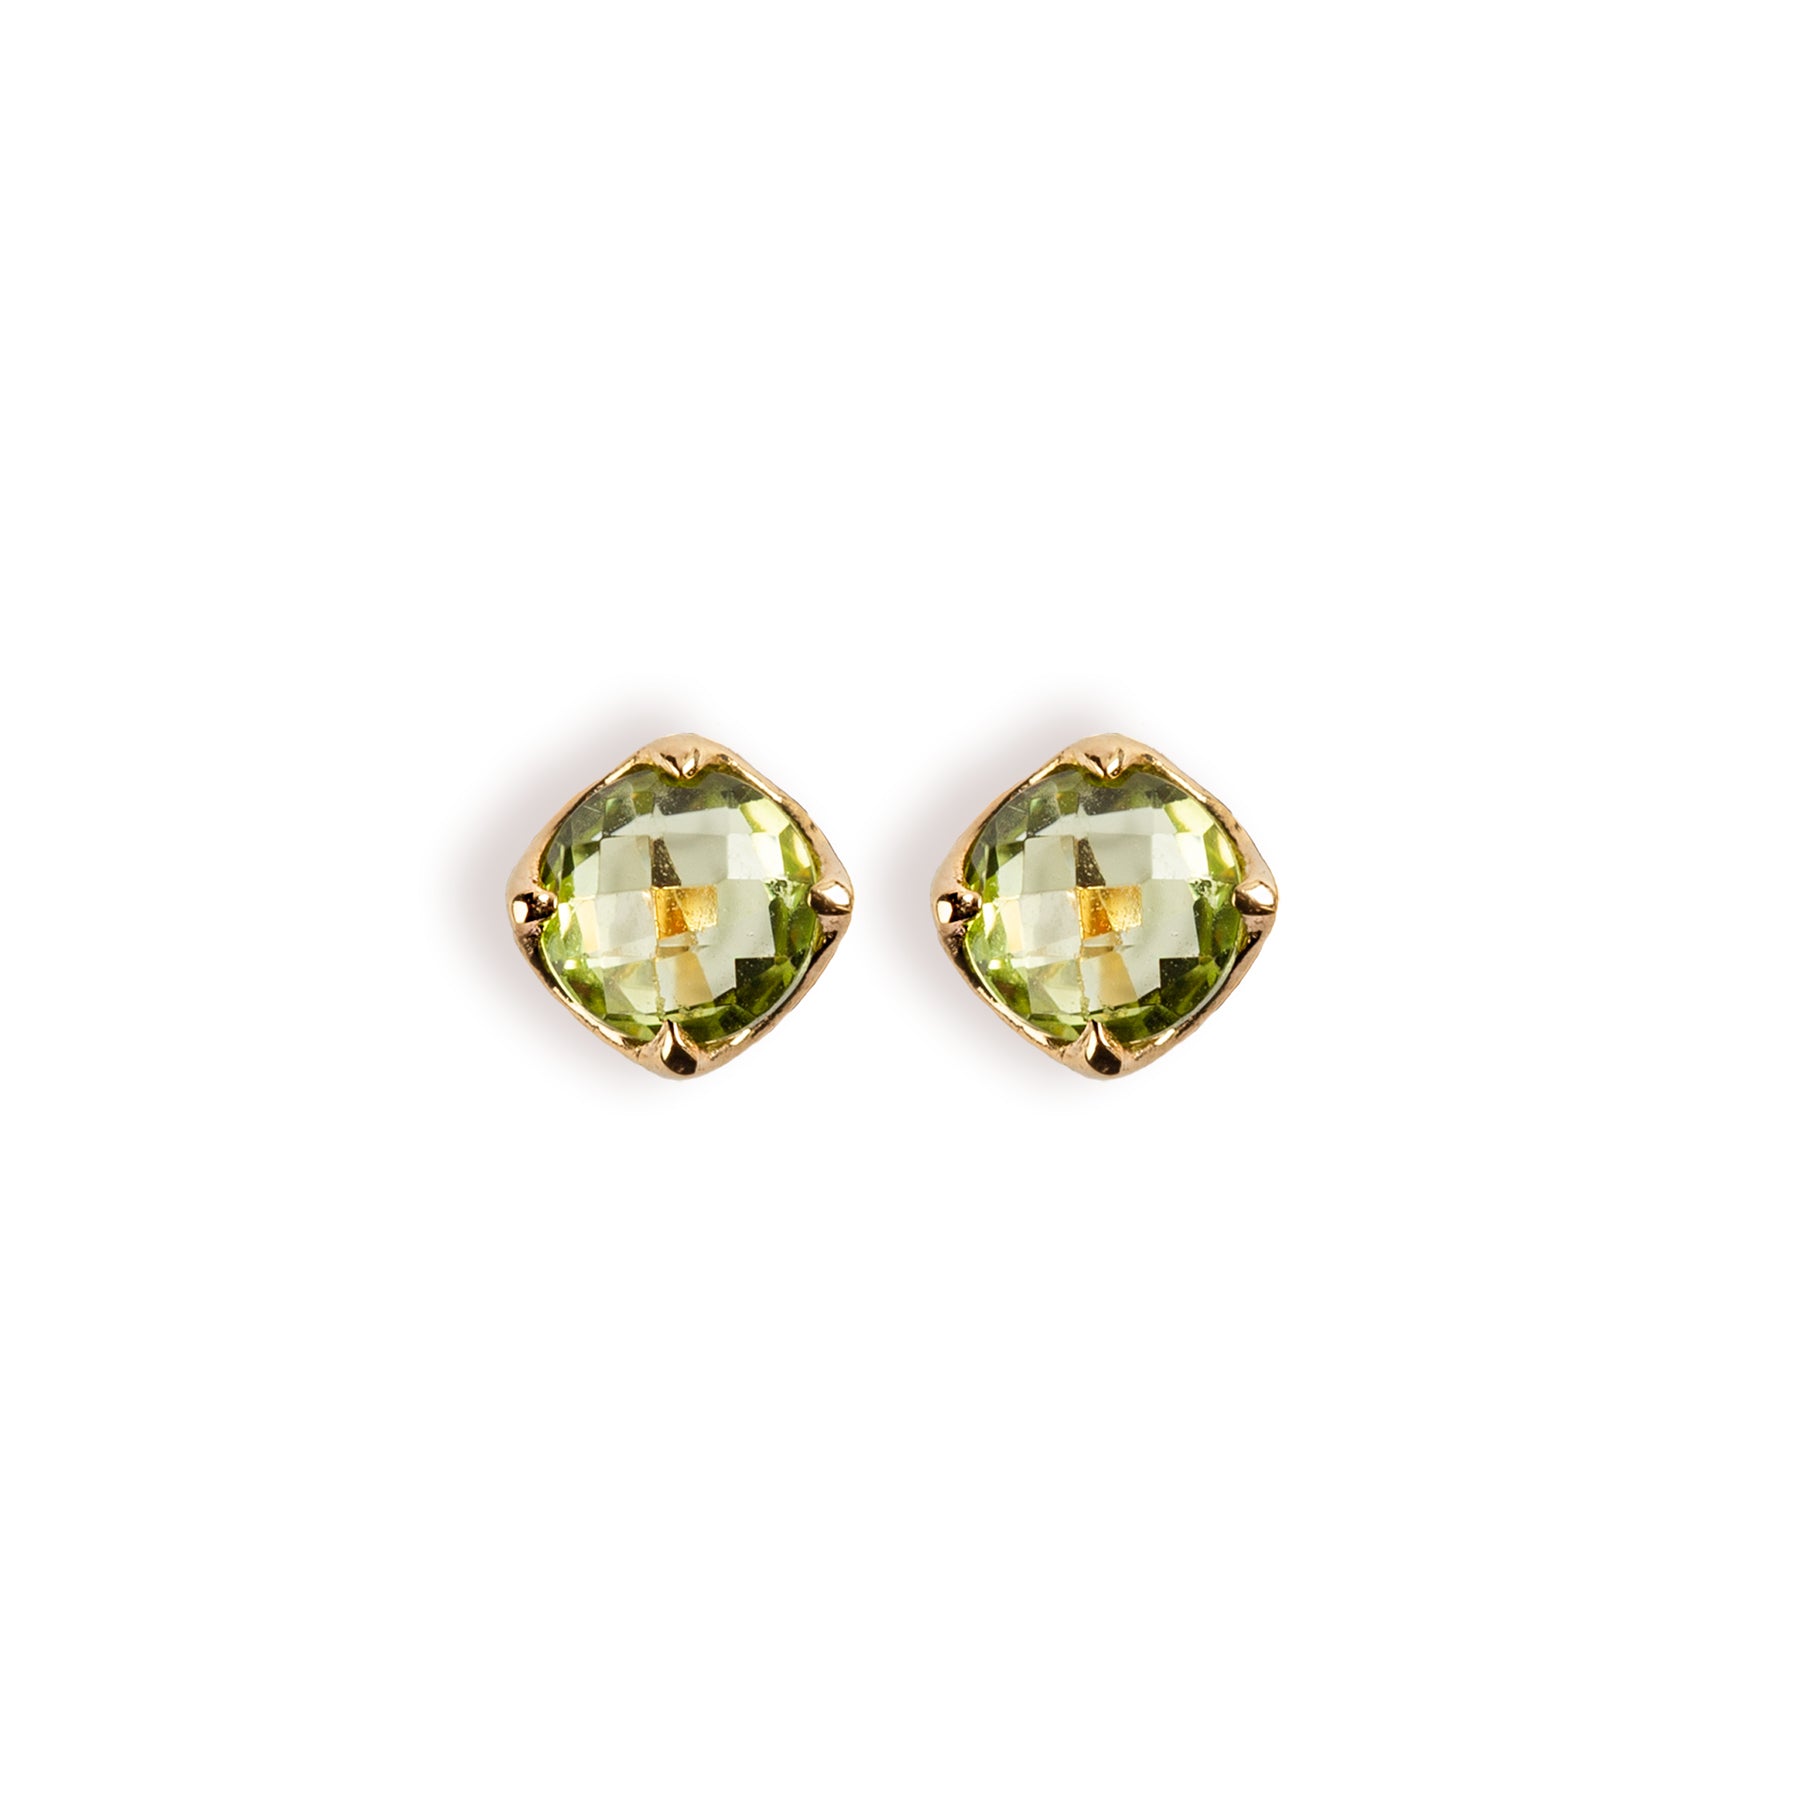 925 SILVER GOLD PLATED ROUND PERIDOT EARRINGS